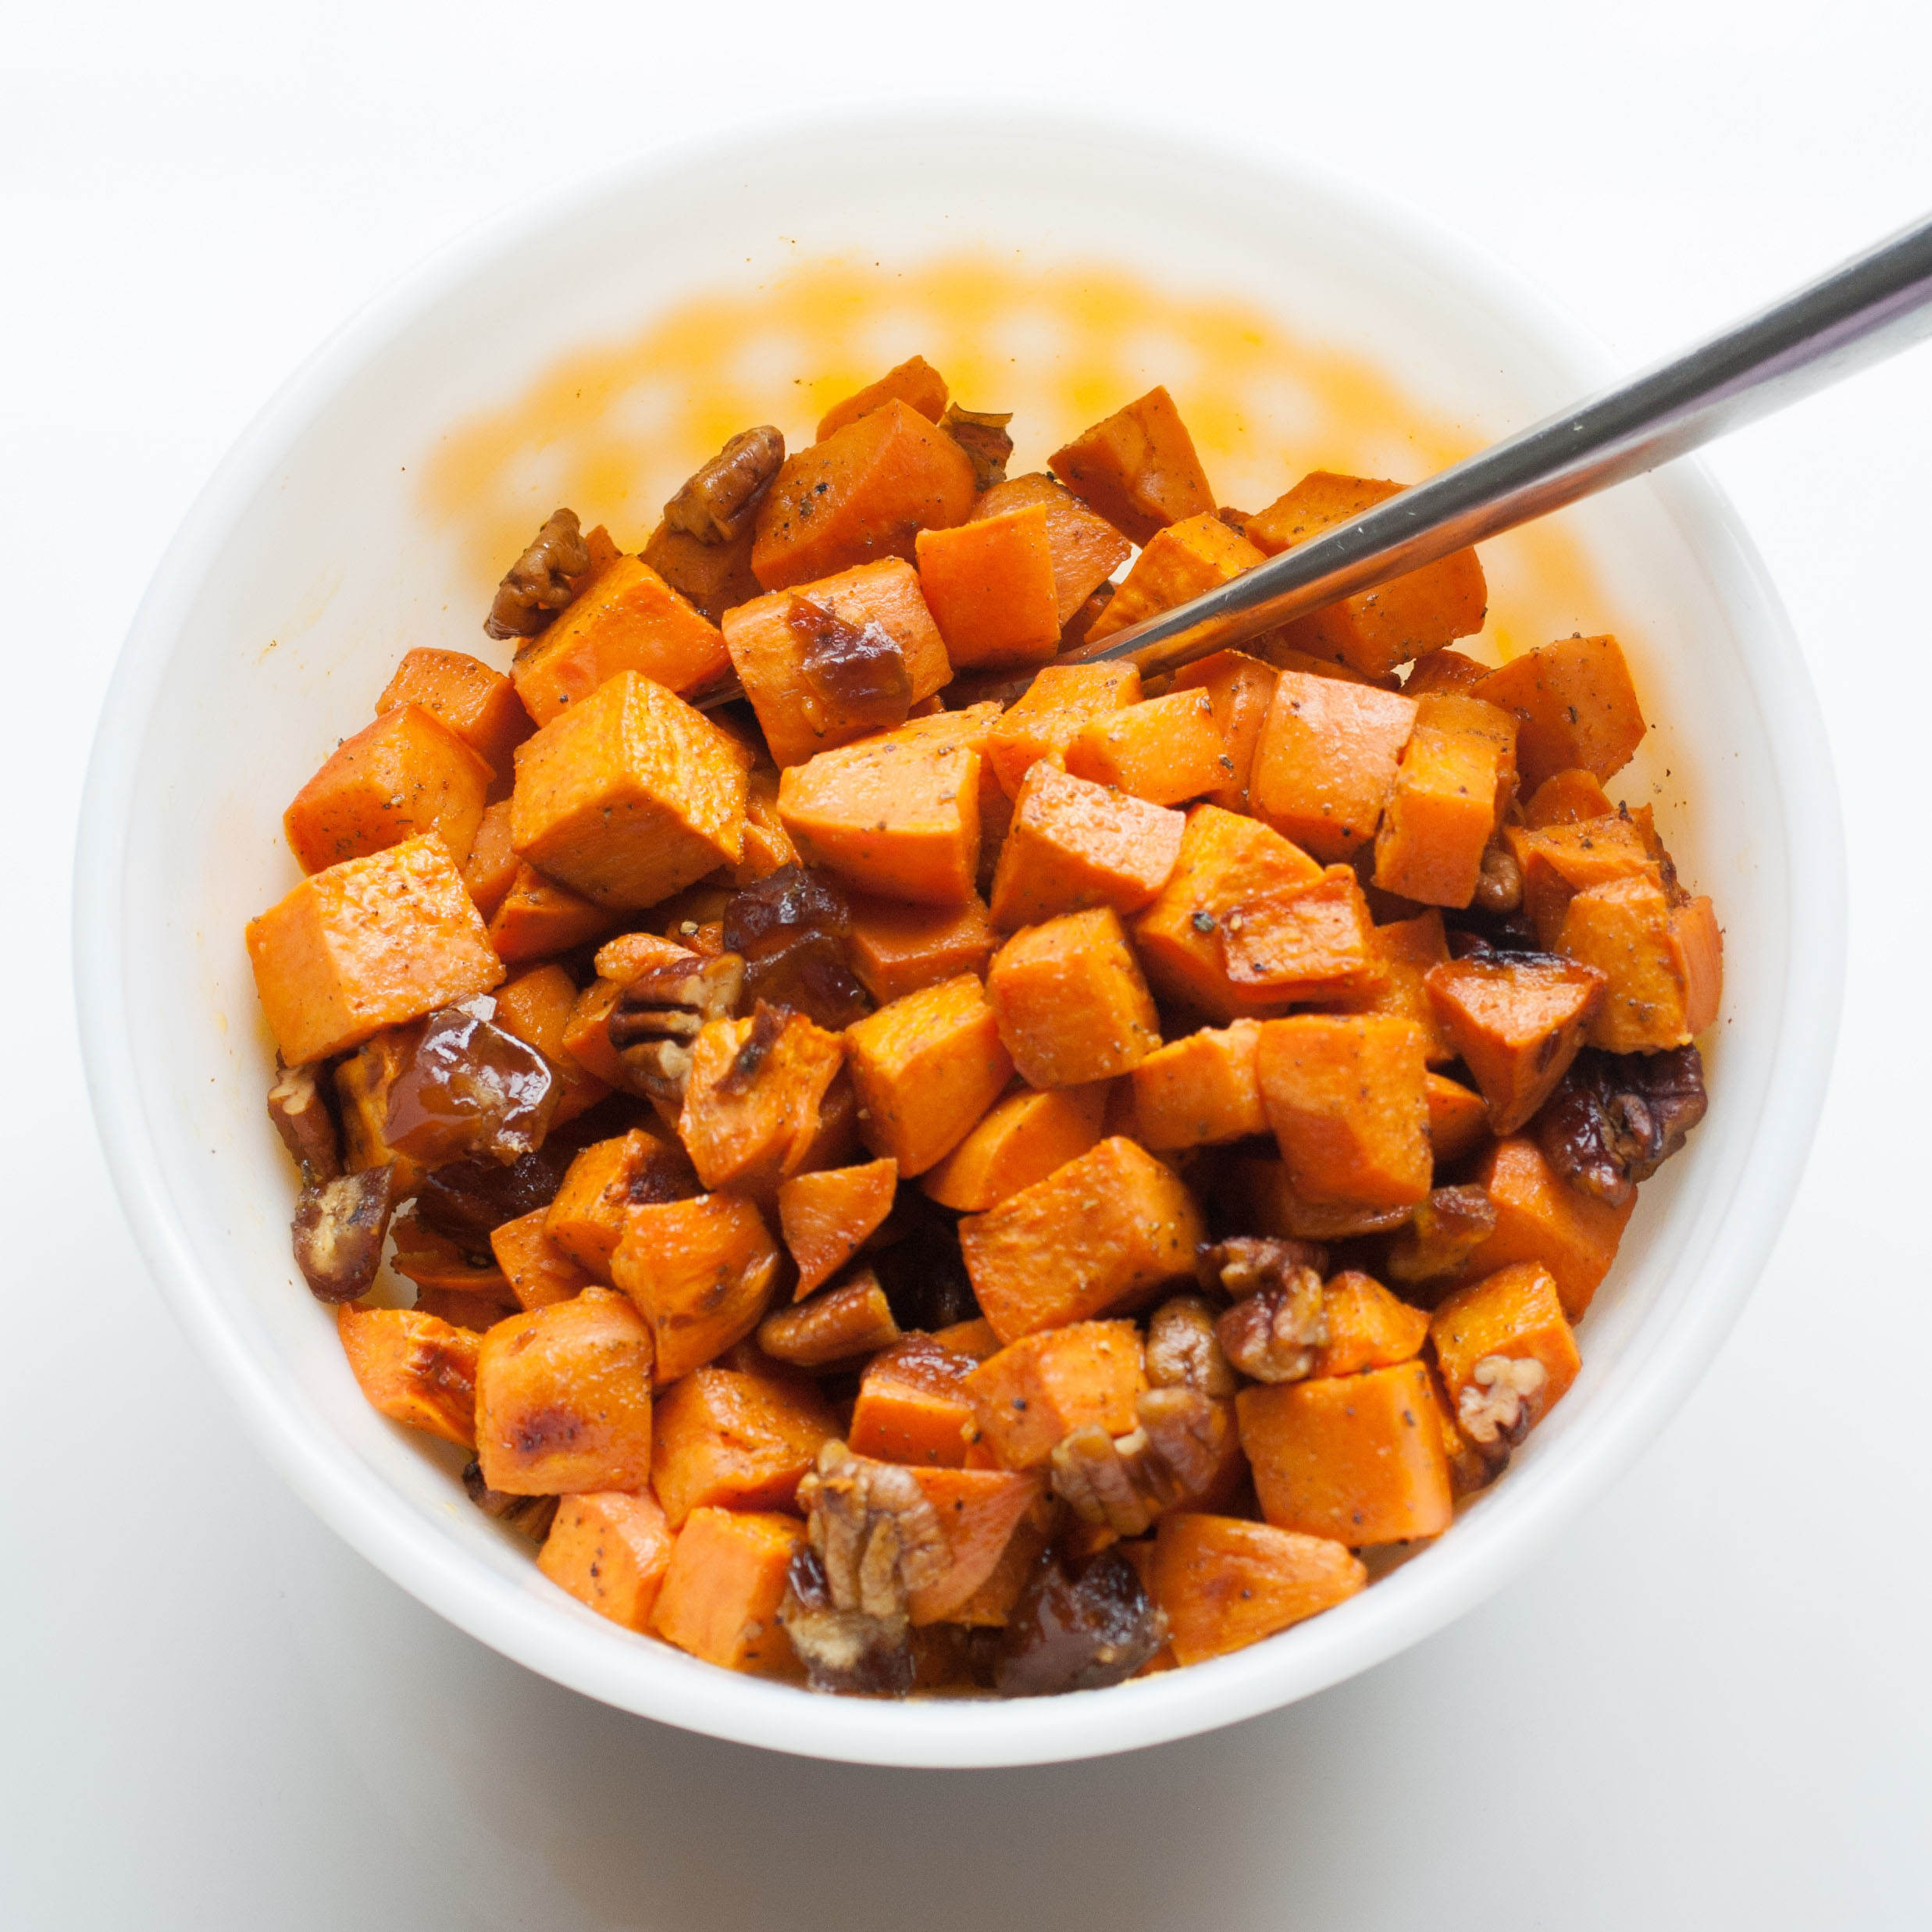 Roasted Sweet Potatoes with Dates and Pecans